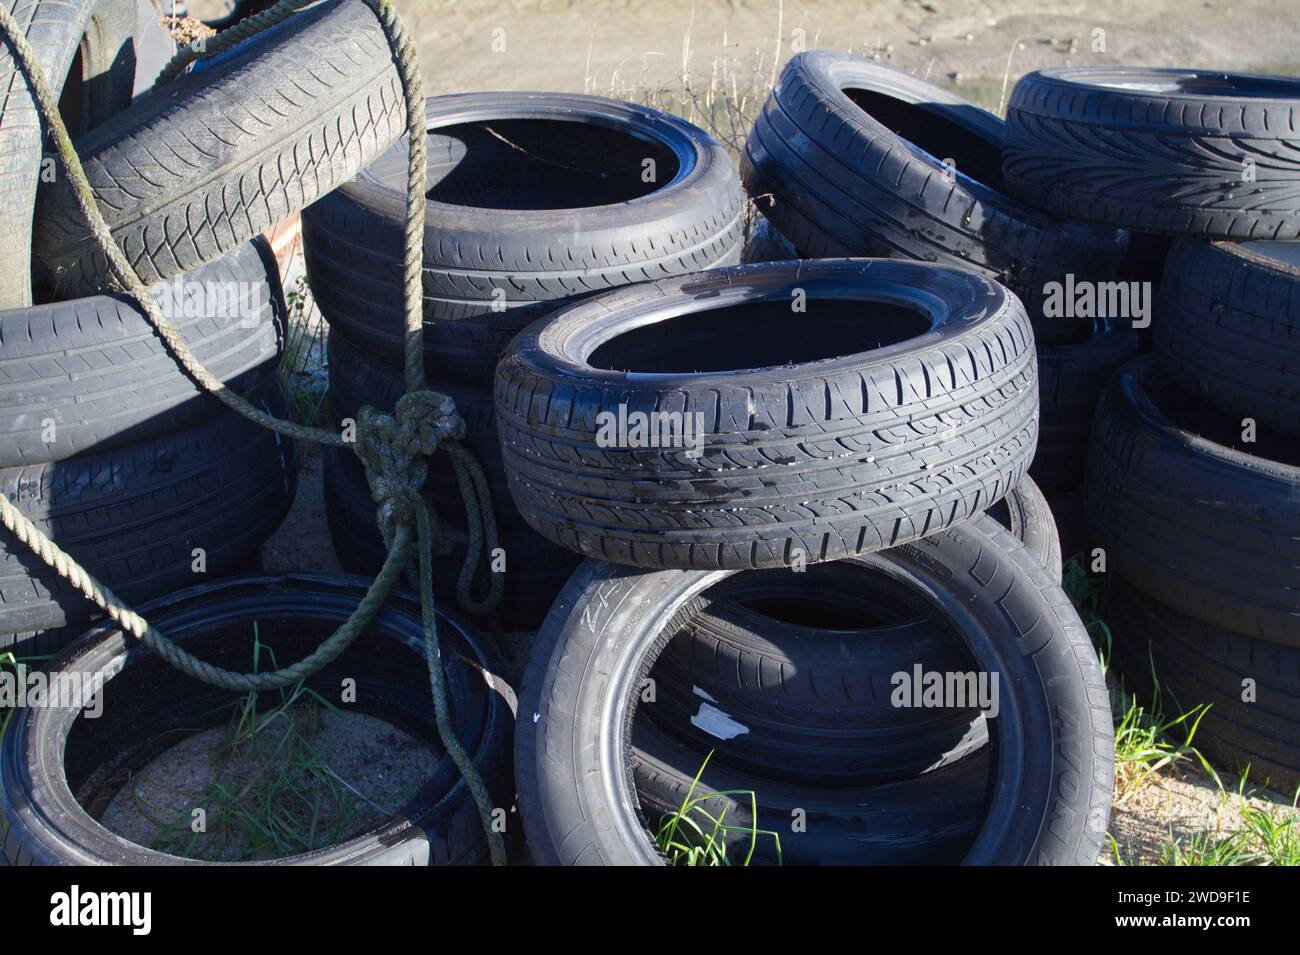 Pile of old discarded tyres Stock Photo